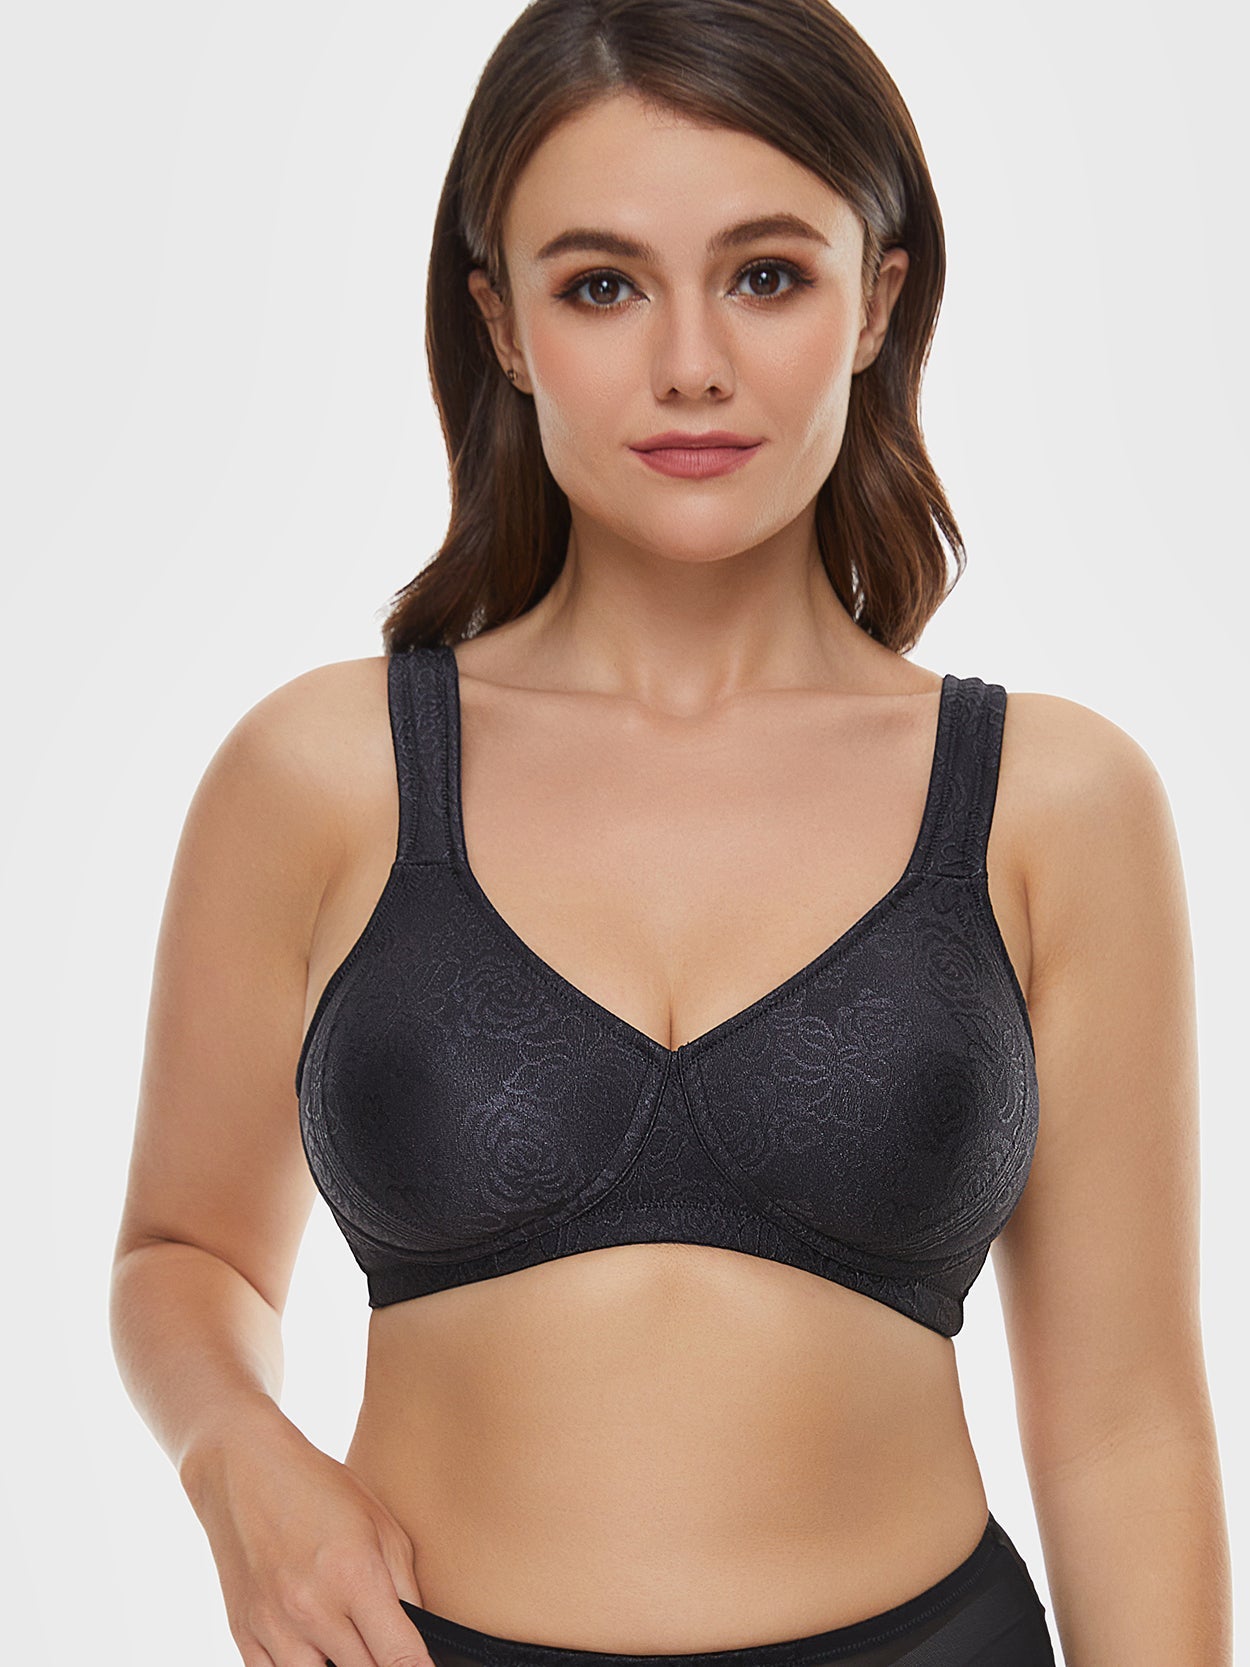 This bra from Wingslove is wire free so its great for peoole who have